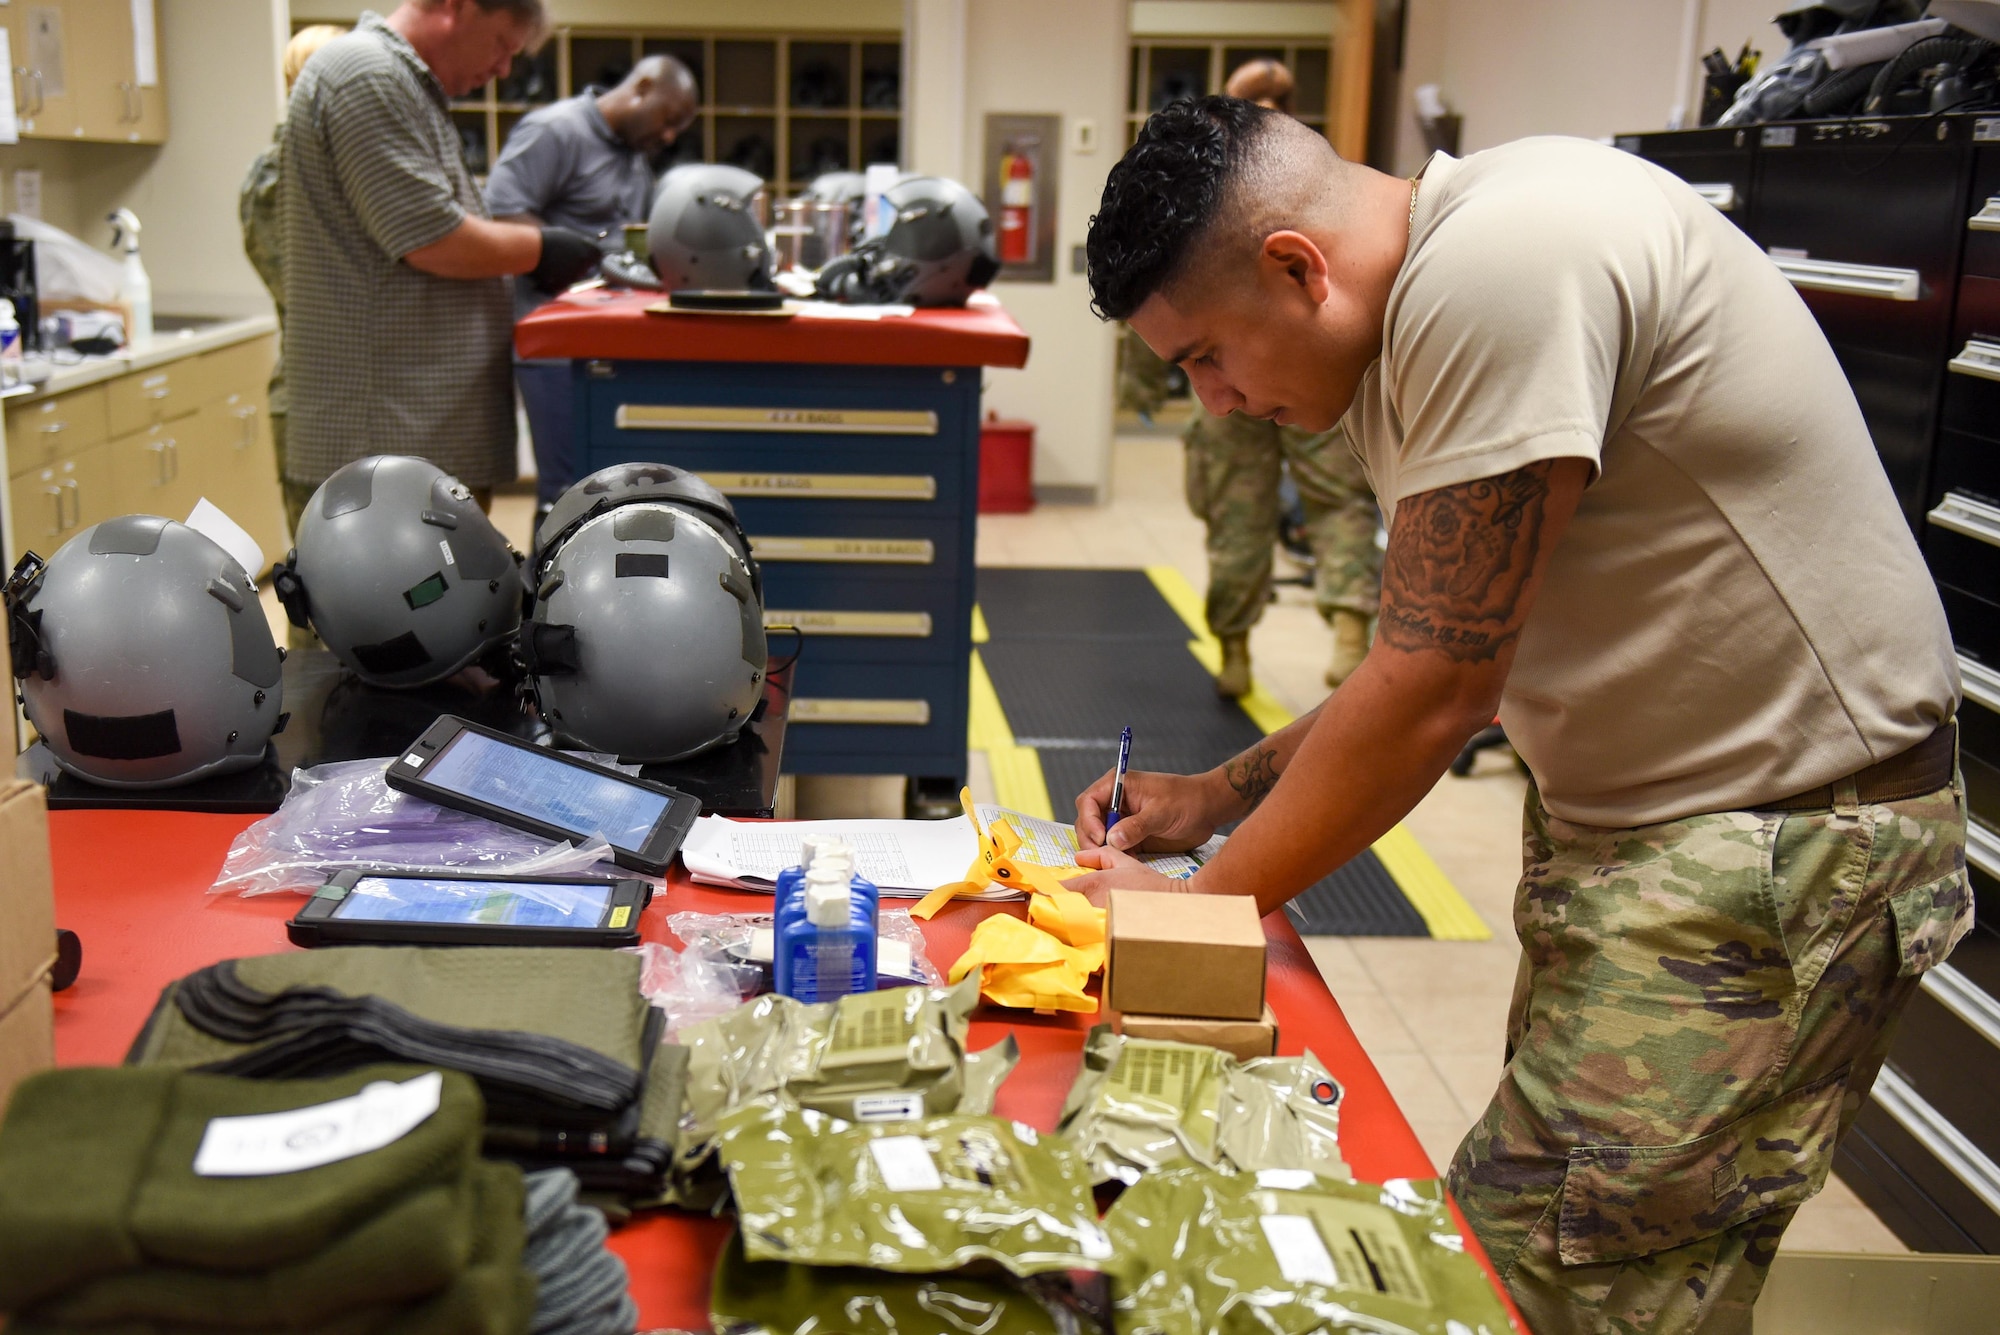 Tech. Sgt. Phillip Caicedo, an aircrew flight equipment technician with the 1st Special Operations Support squadron, packs an LRU-33A 20-man emergency life raft kit for an AC-130J Ghostrider at Hurlburt Field, Fla., June 15, 2017. Caicedo inspects the equipment required to complete the LRU-33A to ensure the equipment is not out of date and safe to use in the event of an in-flight emergency. (U.S. Air Force photo by Staff Sgt. Jeff Parkinson)